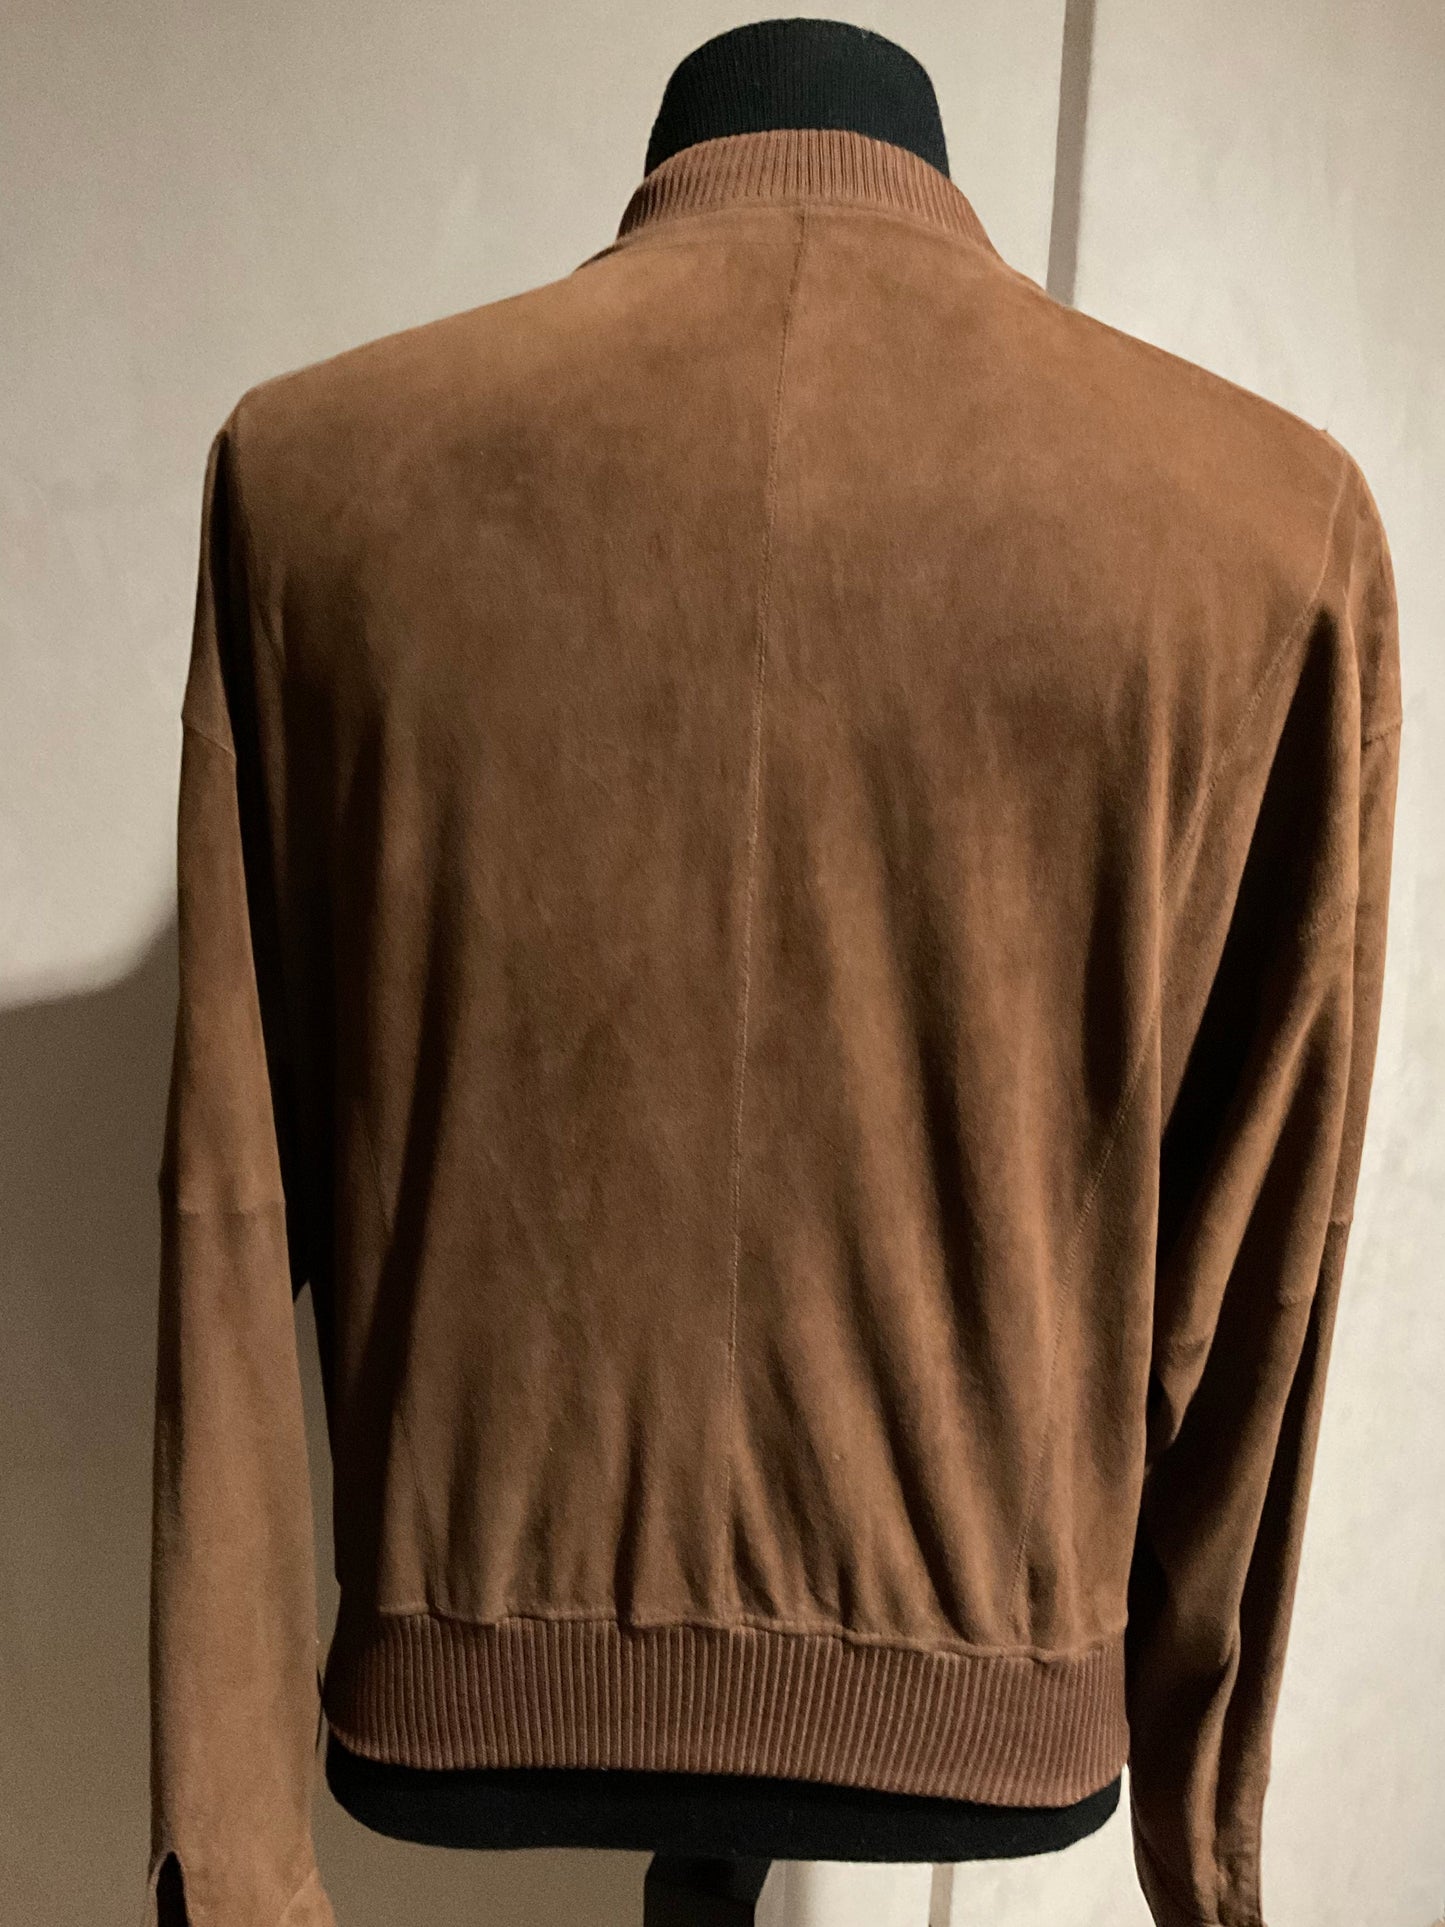 R P SUEDE JACKET / RUST BROWN / MEDIUM / NEW / MADE IN ITALY